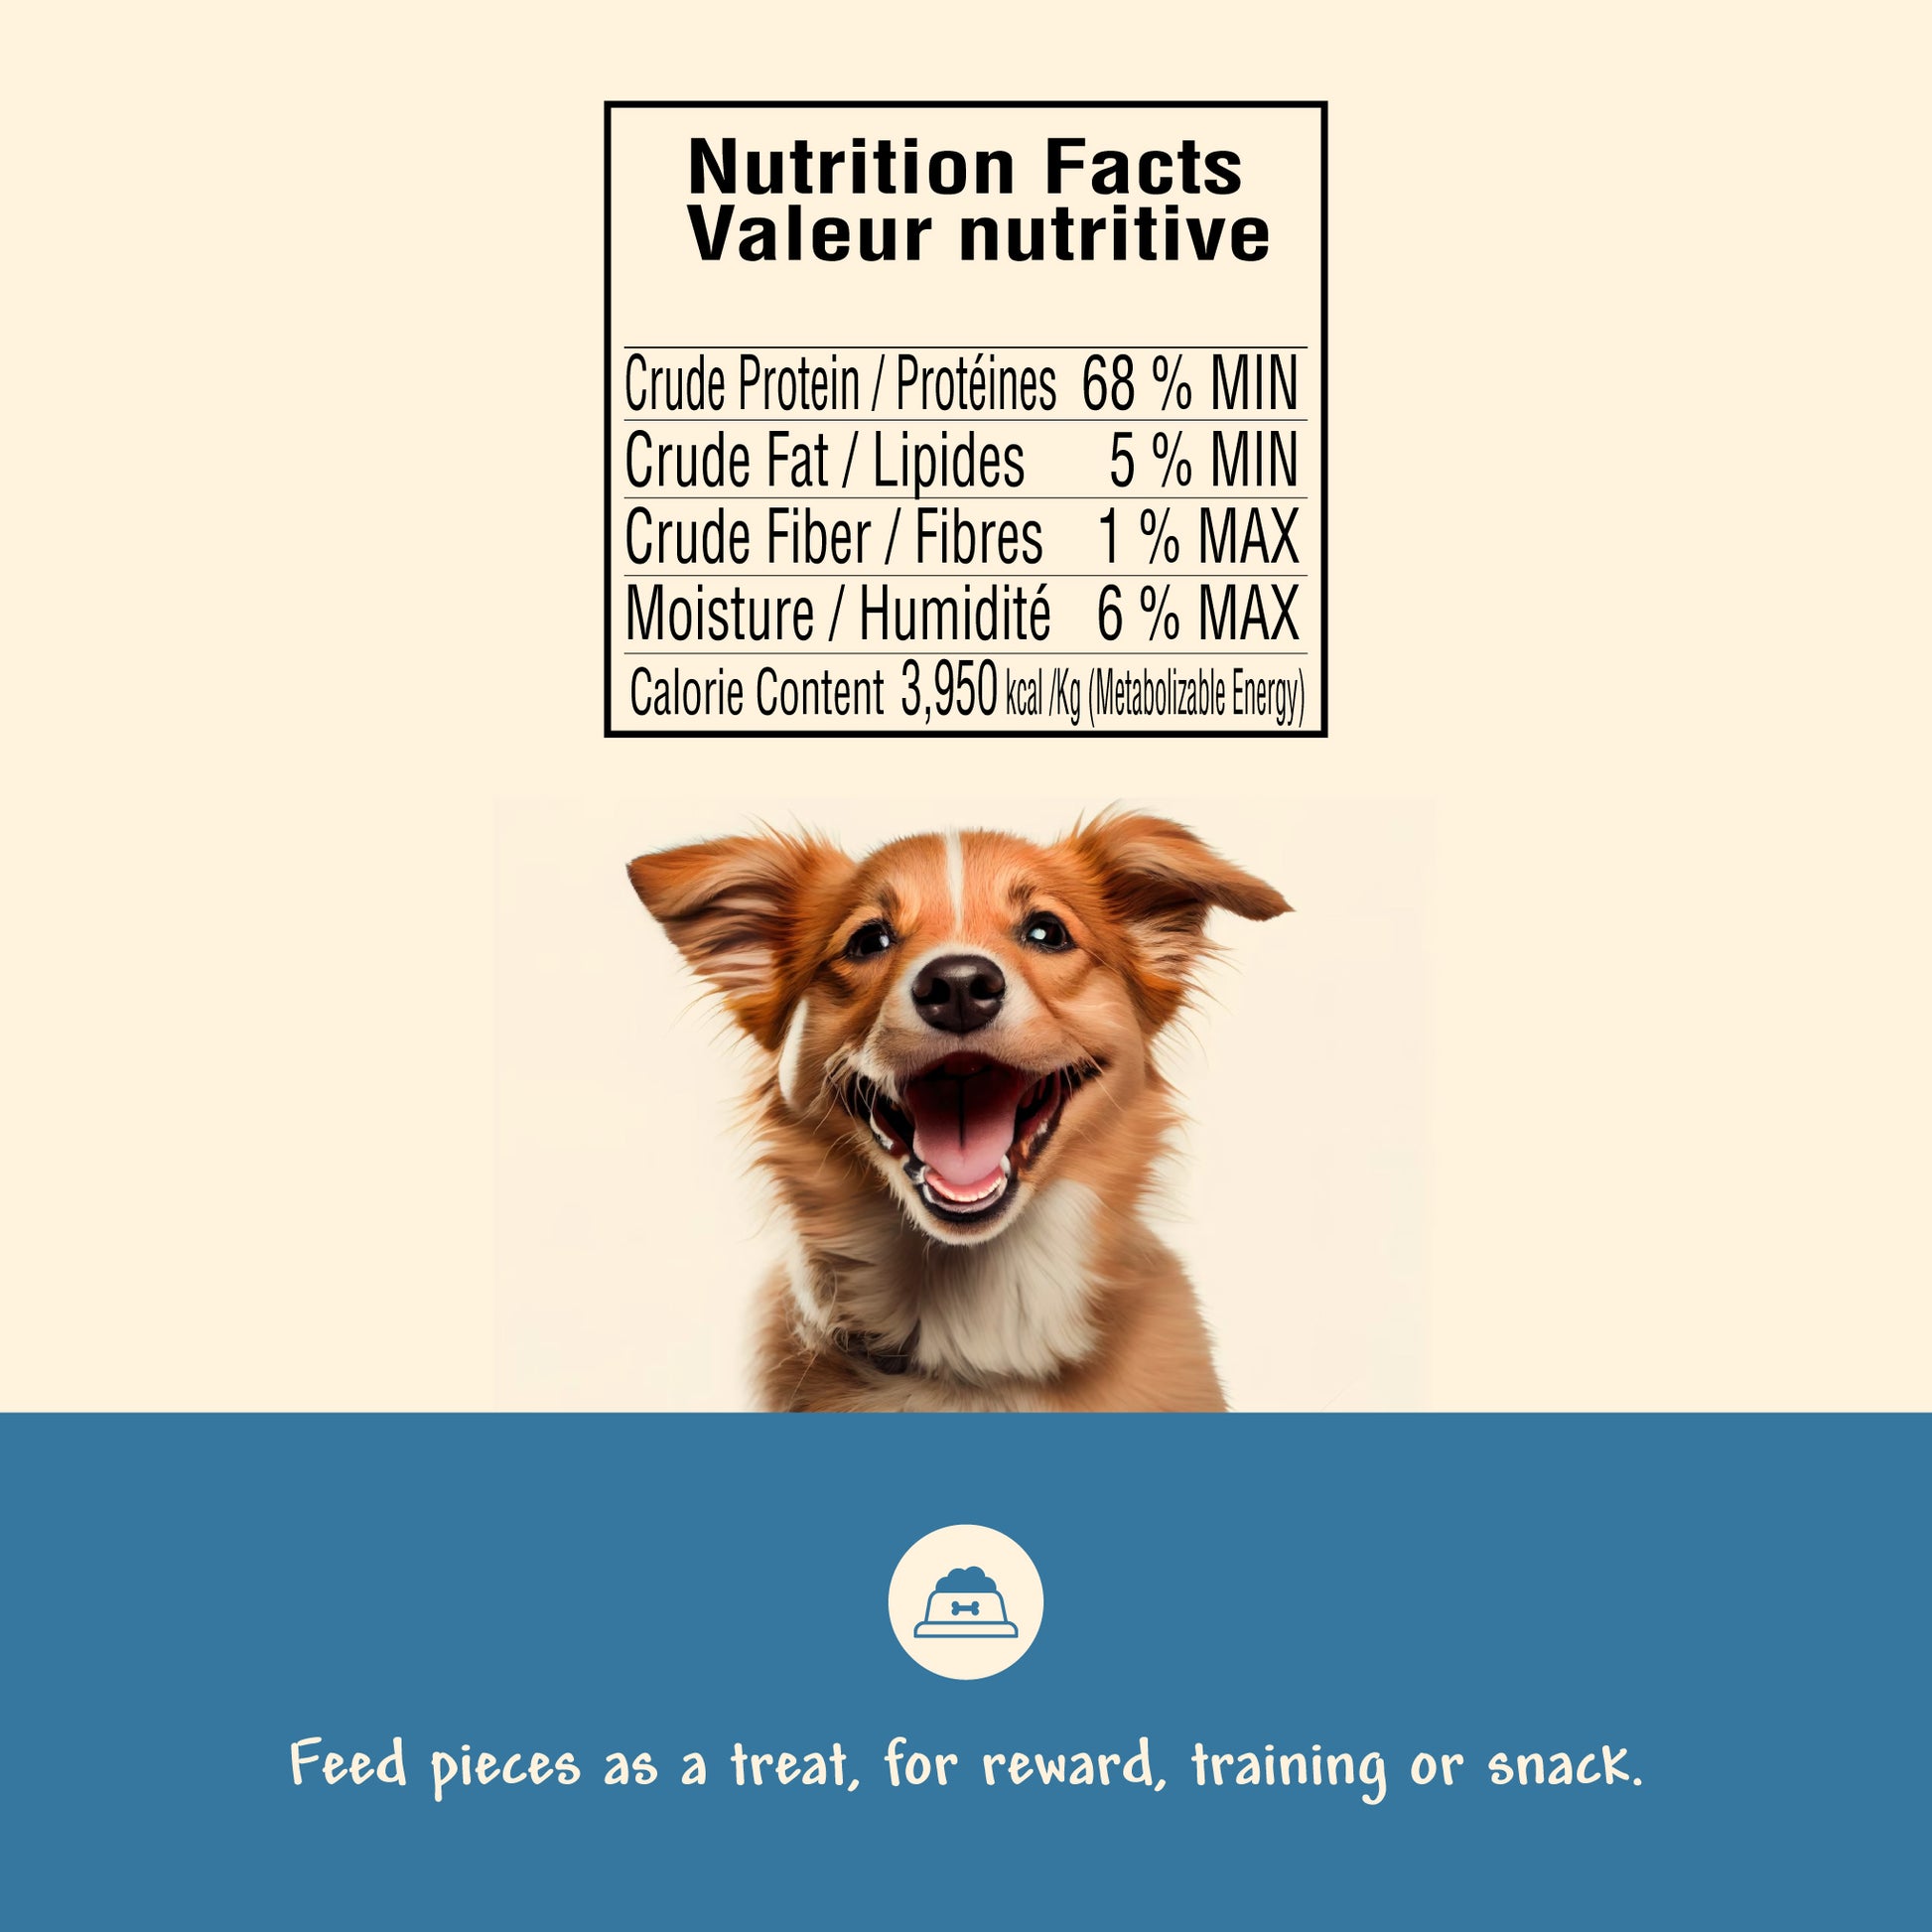 nutrition facts and directions to feed pet on a blue and beige background with a smiling dog